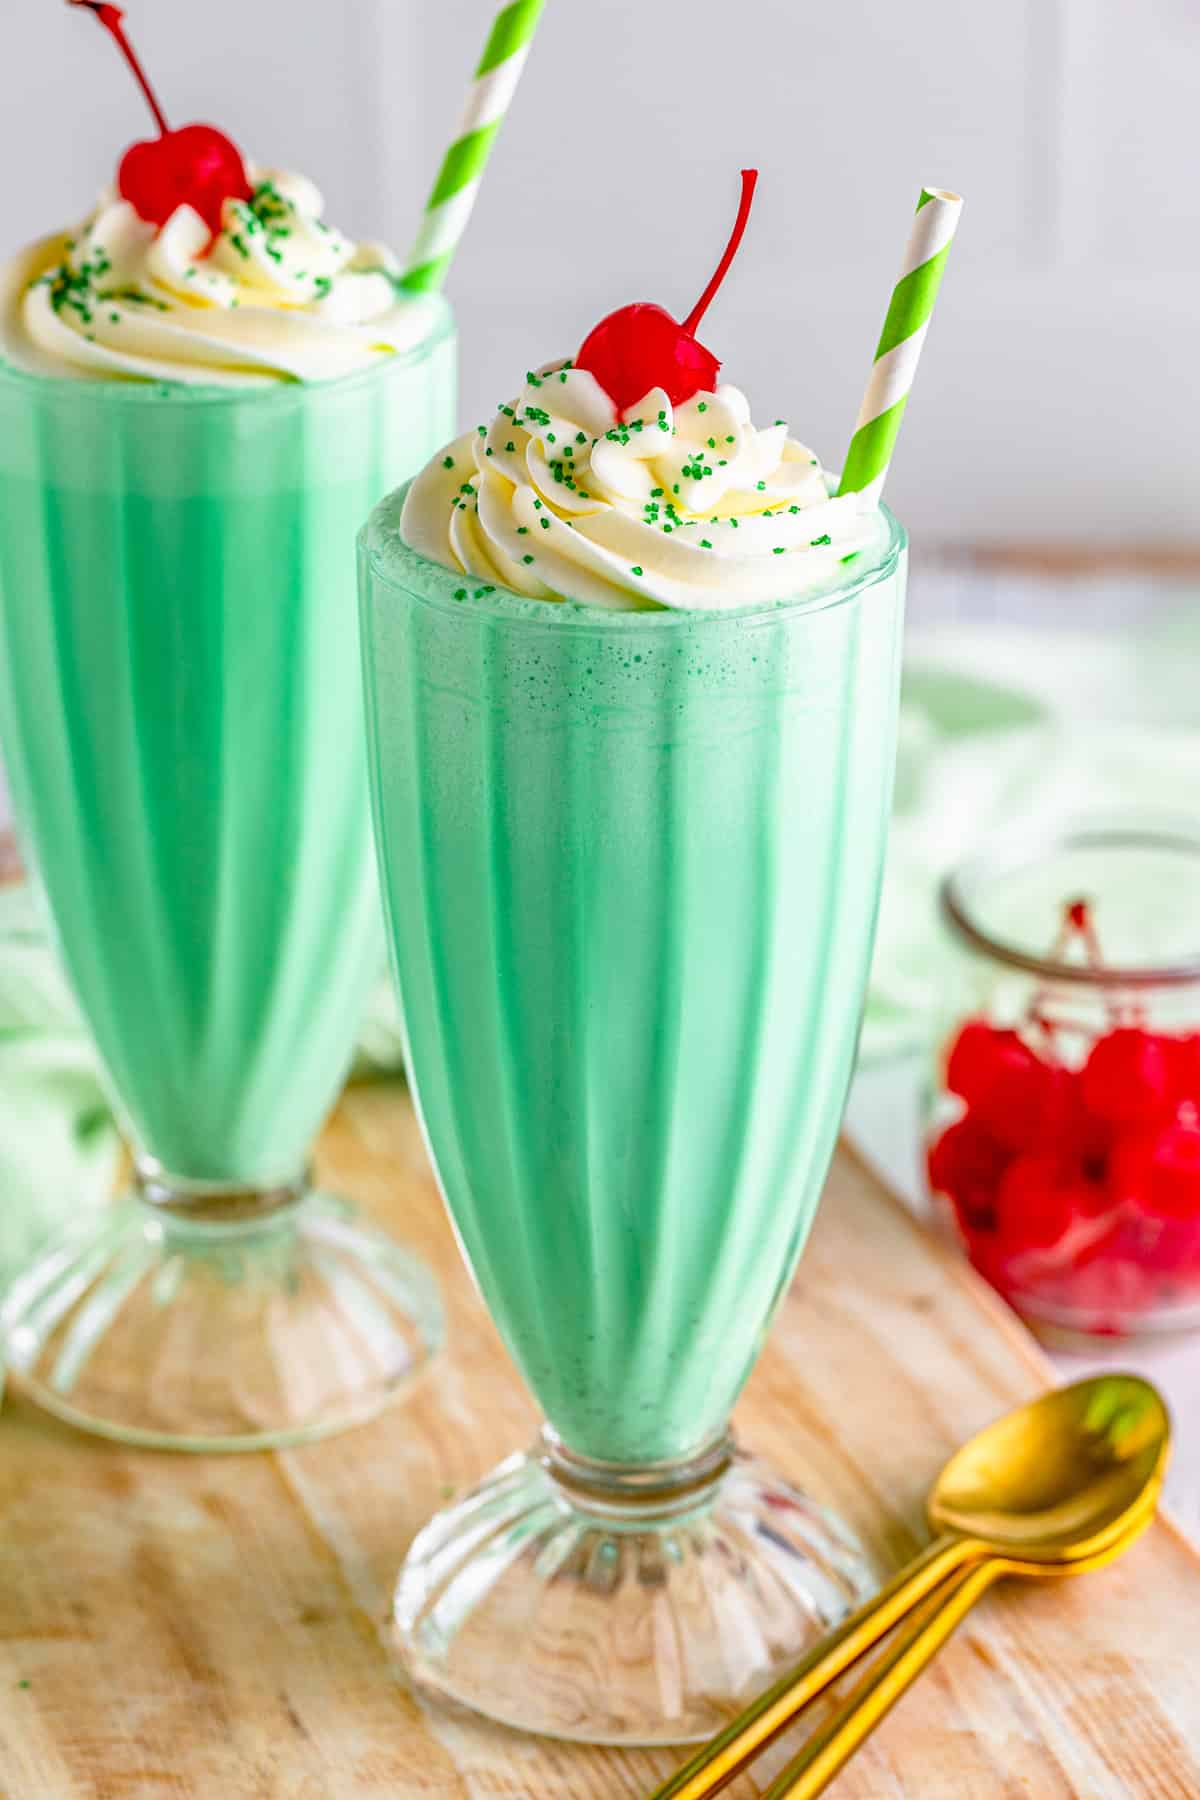 Shamrock Shake Recipe on wooden board with gold spoon. Topped with whipped cream, cheery and green sprinkles.